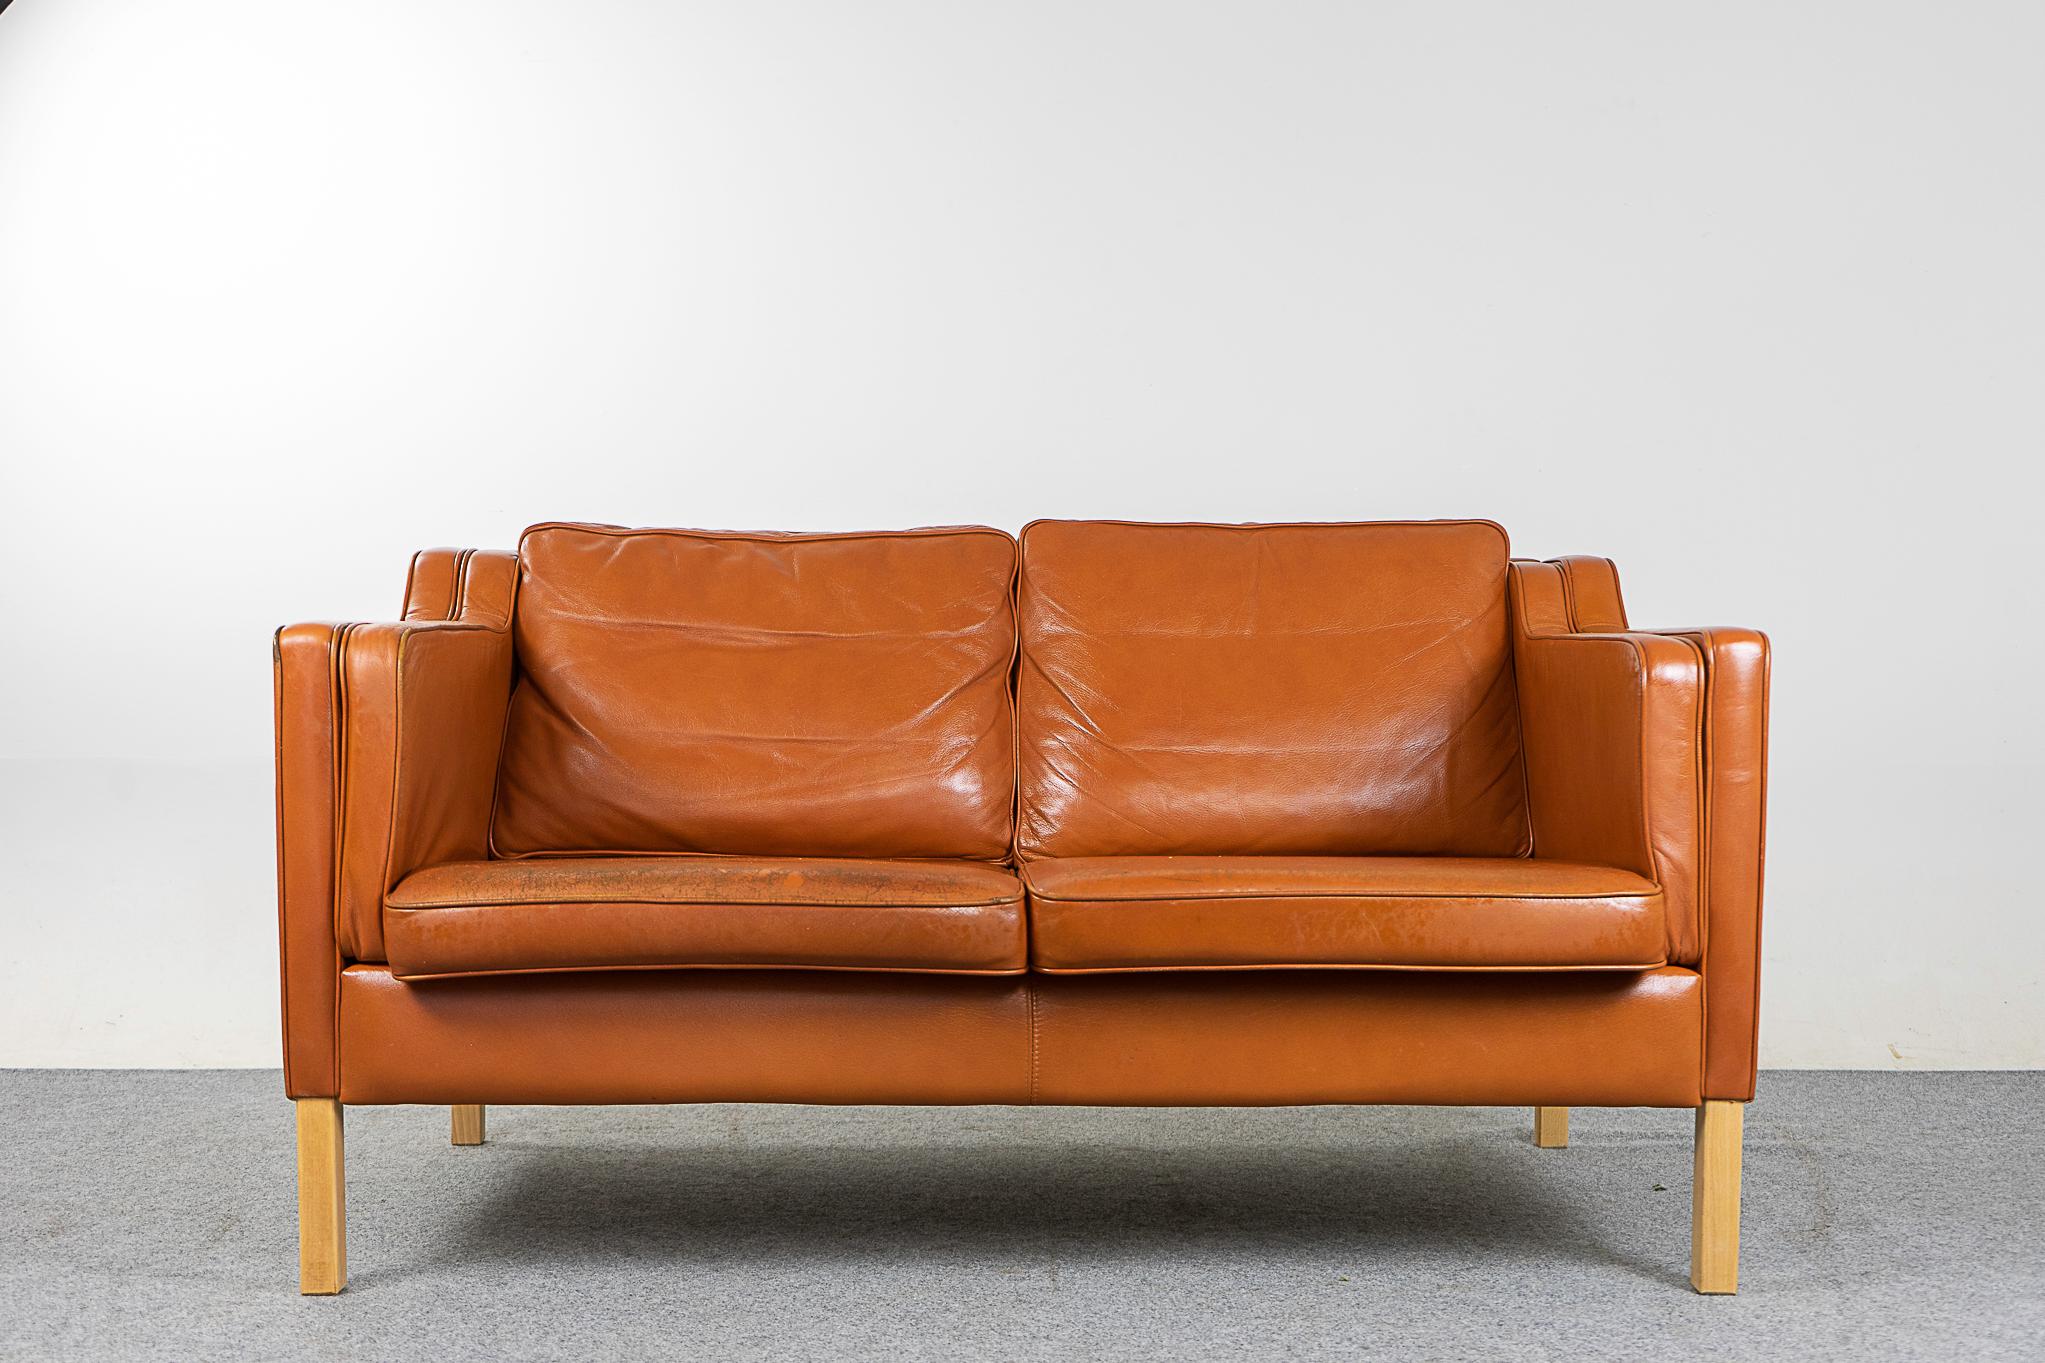 Leather mid-century loveseat, circa 1960's. Original tobacco leather is soft and supple while also being durable to ensure years of use and enjoyment. Very comfortable seats, lined with Stouby fabric. Seats have minor micro scratches.

Please